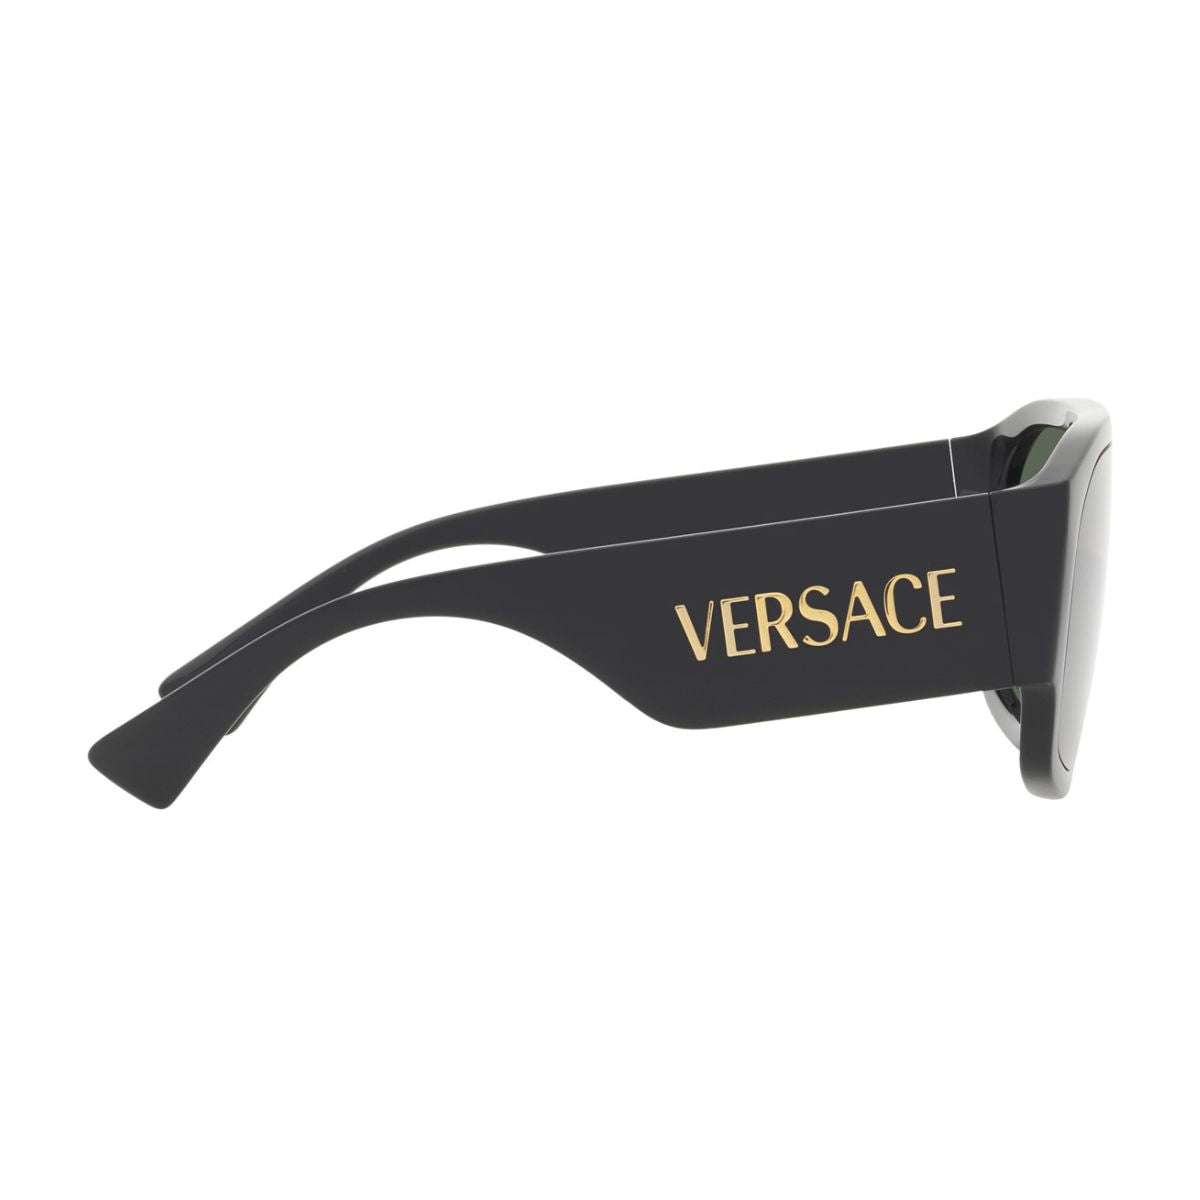 " Find fashionable Versace 4439 GB1/71 Sunglasses for Men & Women at Optorium - sleek square shape in gold and black, durable polycarbonate, UV protection."